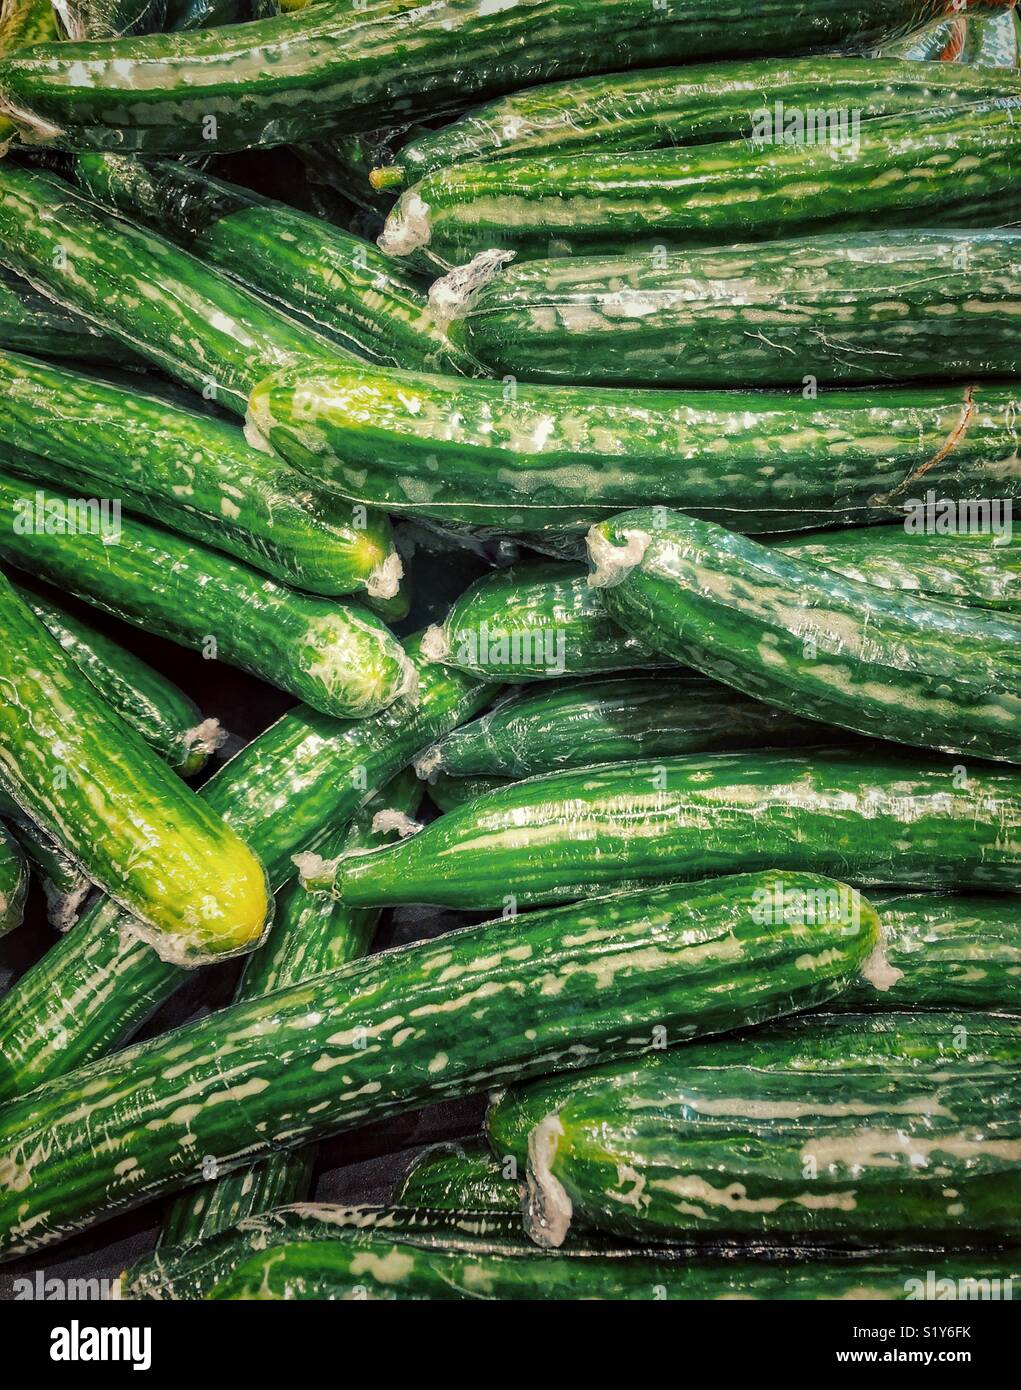 https://c8.alamy.com/comp/S1Y6FK/full-frame-image-of-plastic-wrapped-english-cucumbers-for-sale-in-S1Y6FK.jpg